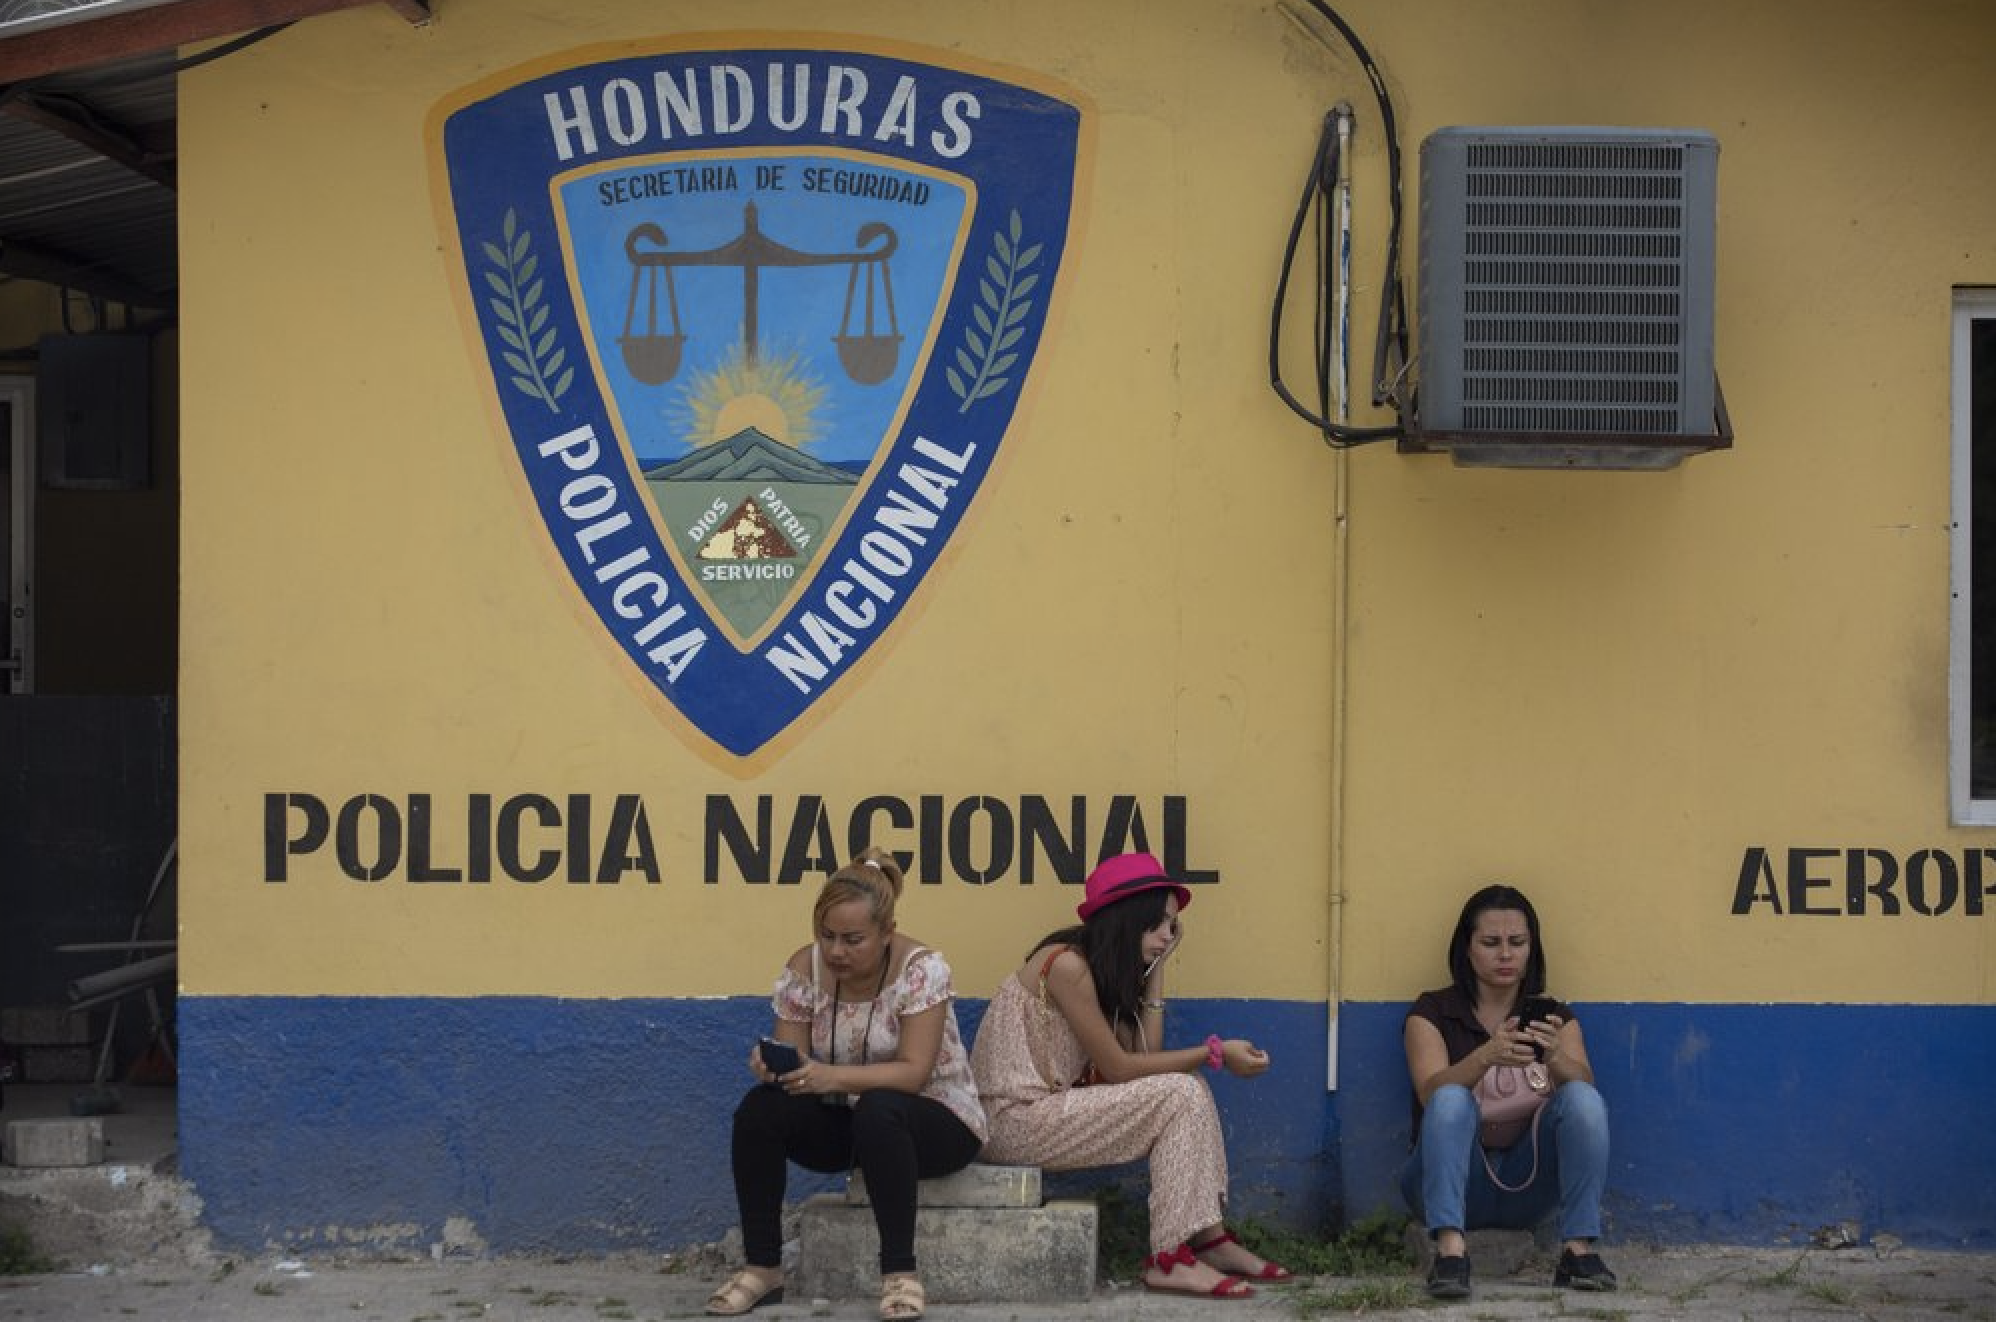 Family members wait outside the Ramon Villeda International Airport in La Lima, Honduras on Nov. 29, 2019, for the arrival of their relatives who were deported from the United States. Immigration apprehensions along the U.S.-Mexico border have plunged by more than 70 percent in the past six months, down sharply from at least 132,000 in May. Image by Moises Castillo/ AP Photo. Honduras, 2019.